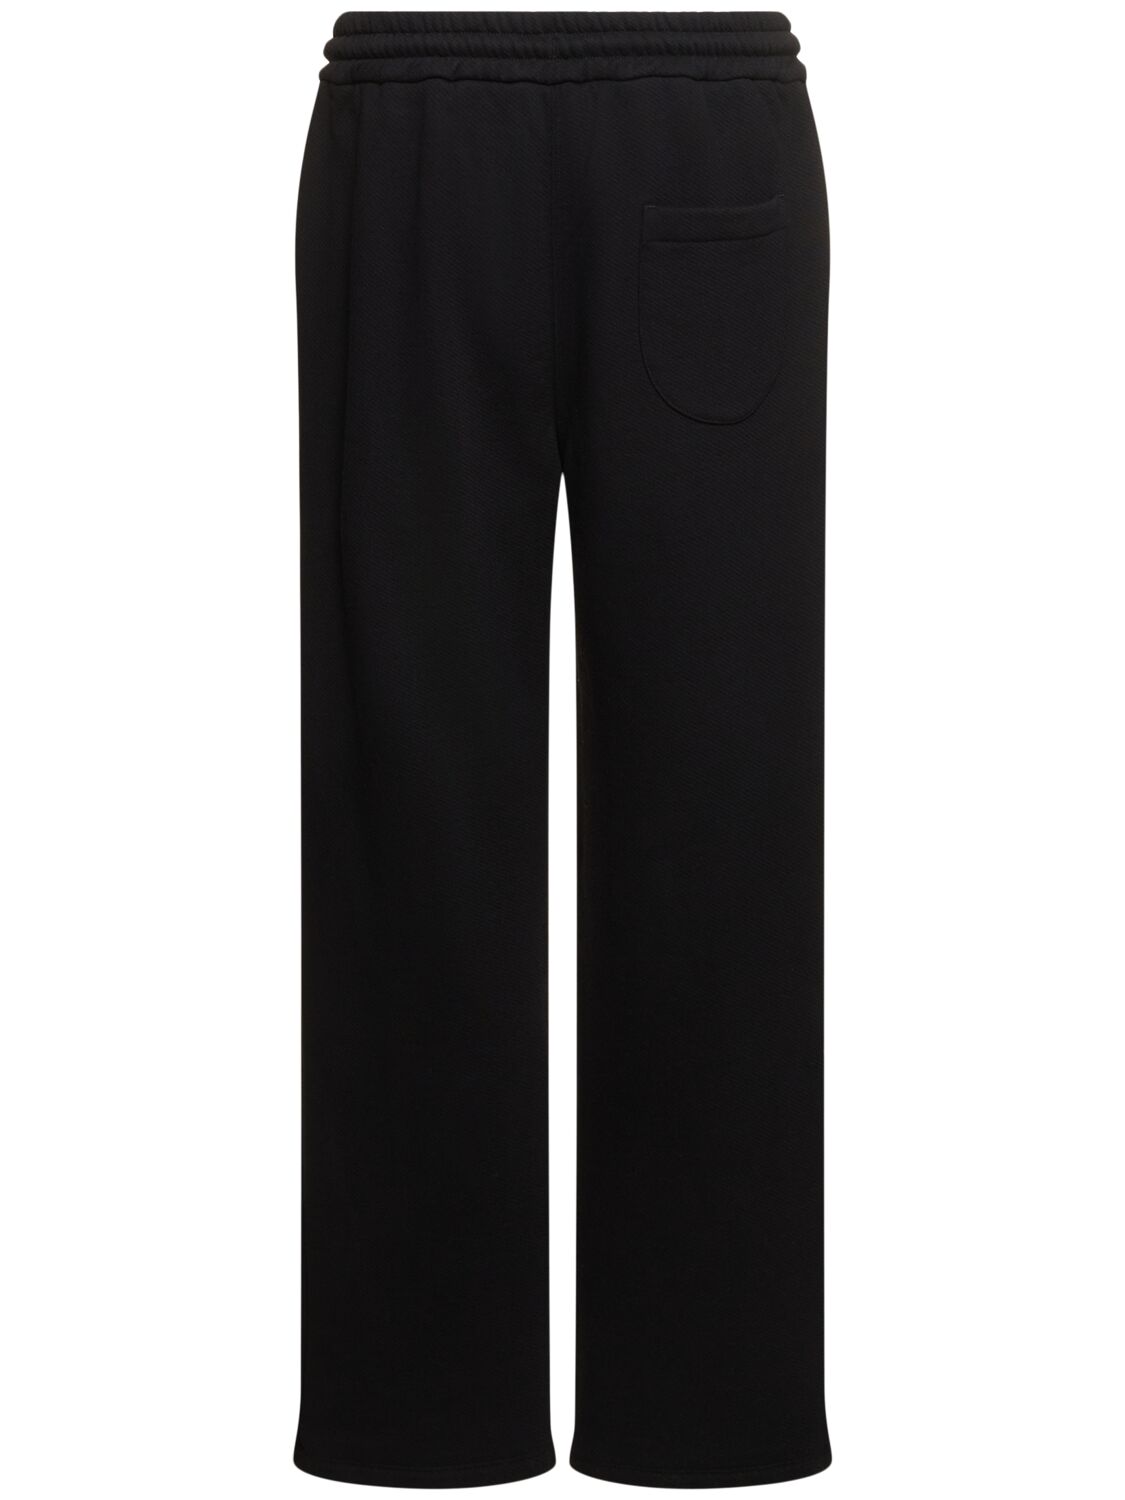 Shop Off-white Ow Embroidery Cotton Sweatpants In Black